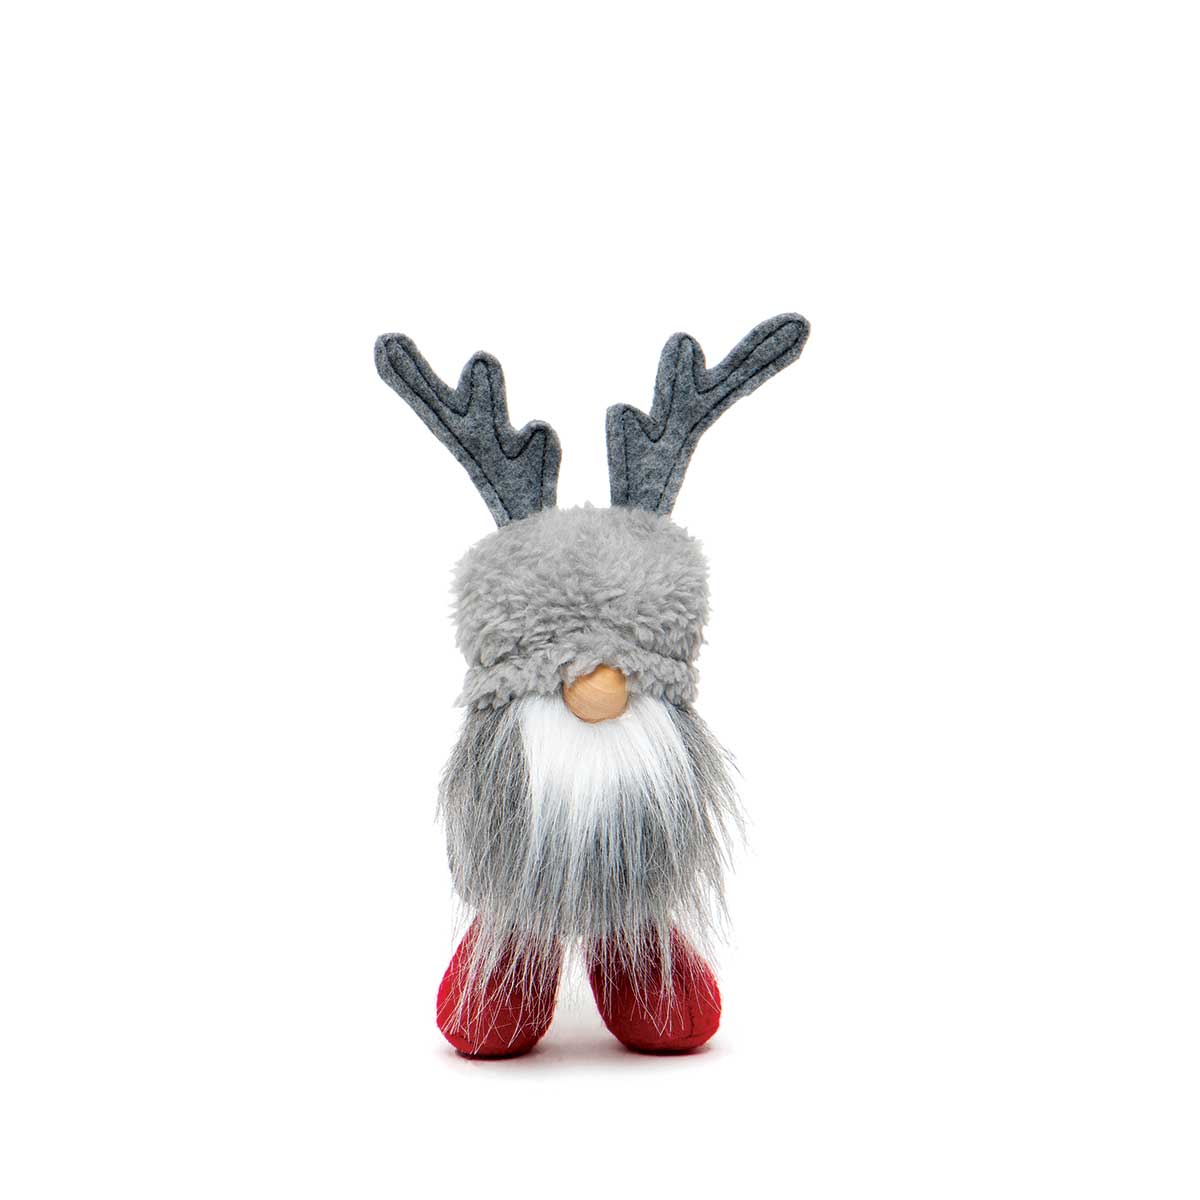 b50 GNOME REINDEER SMALL 2.5IN X 1.5IN X 7.5IN POLYESTER